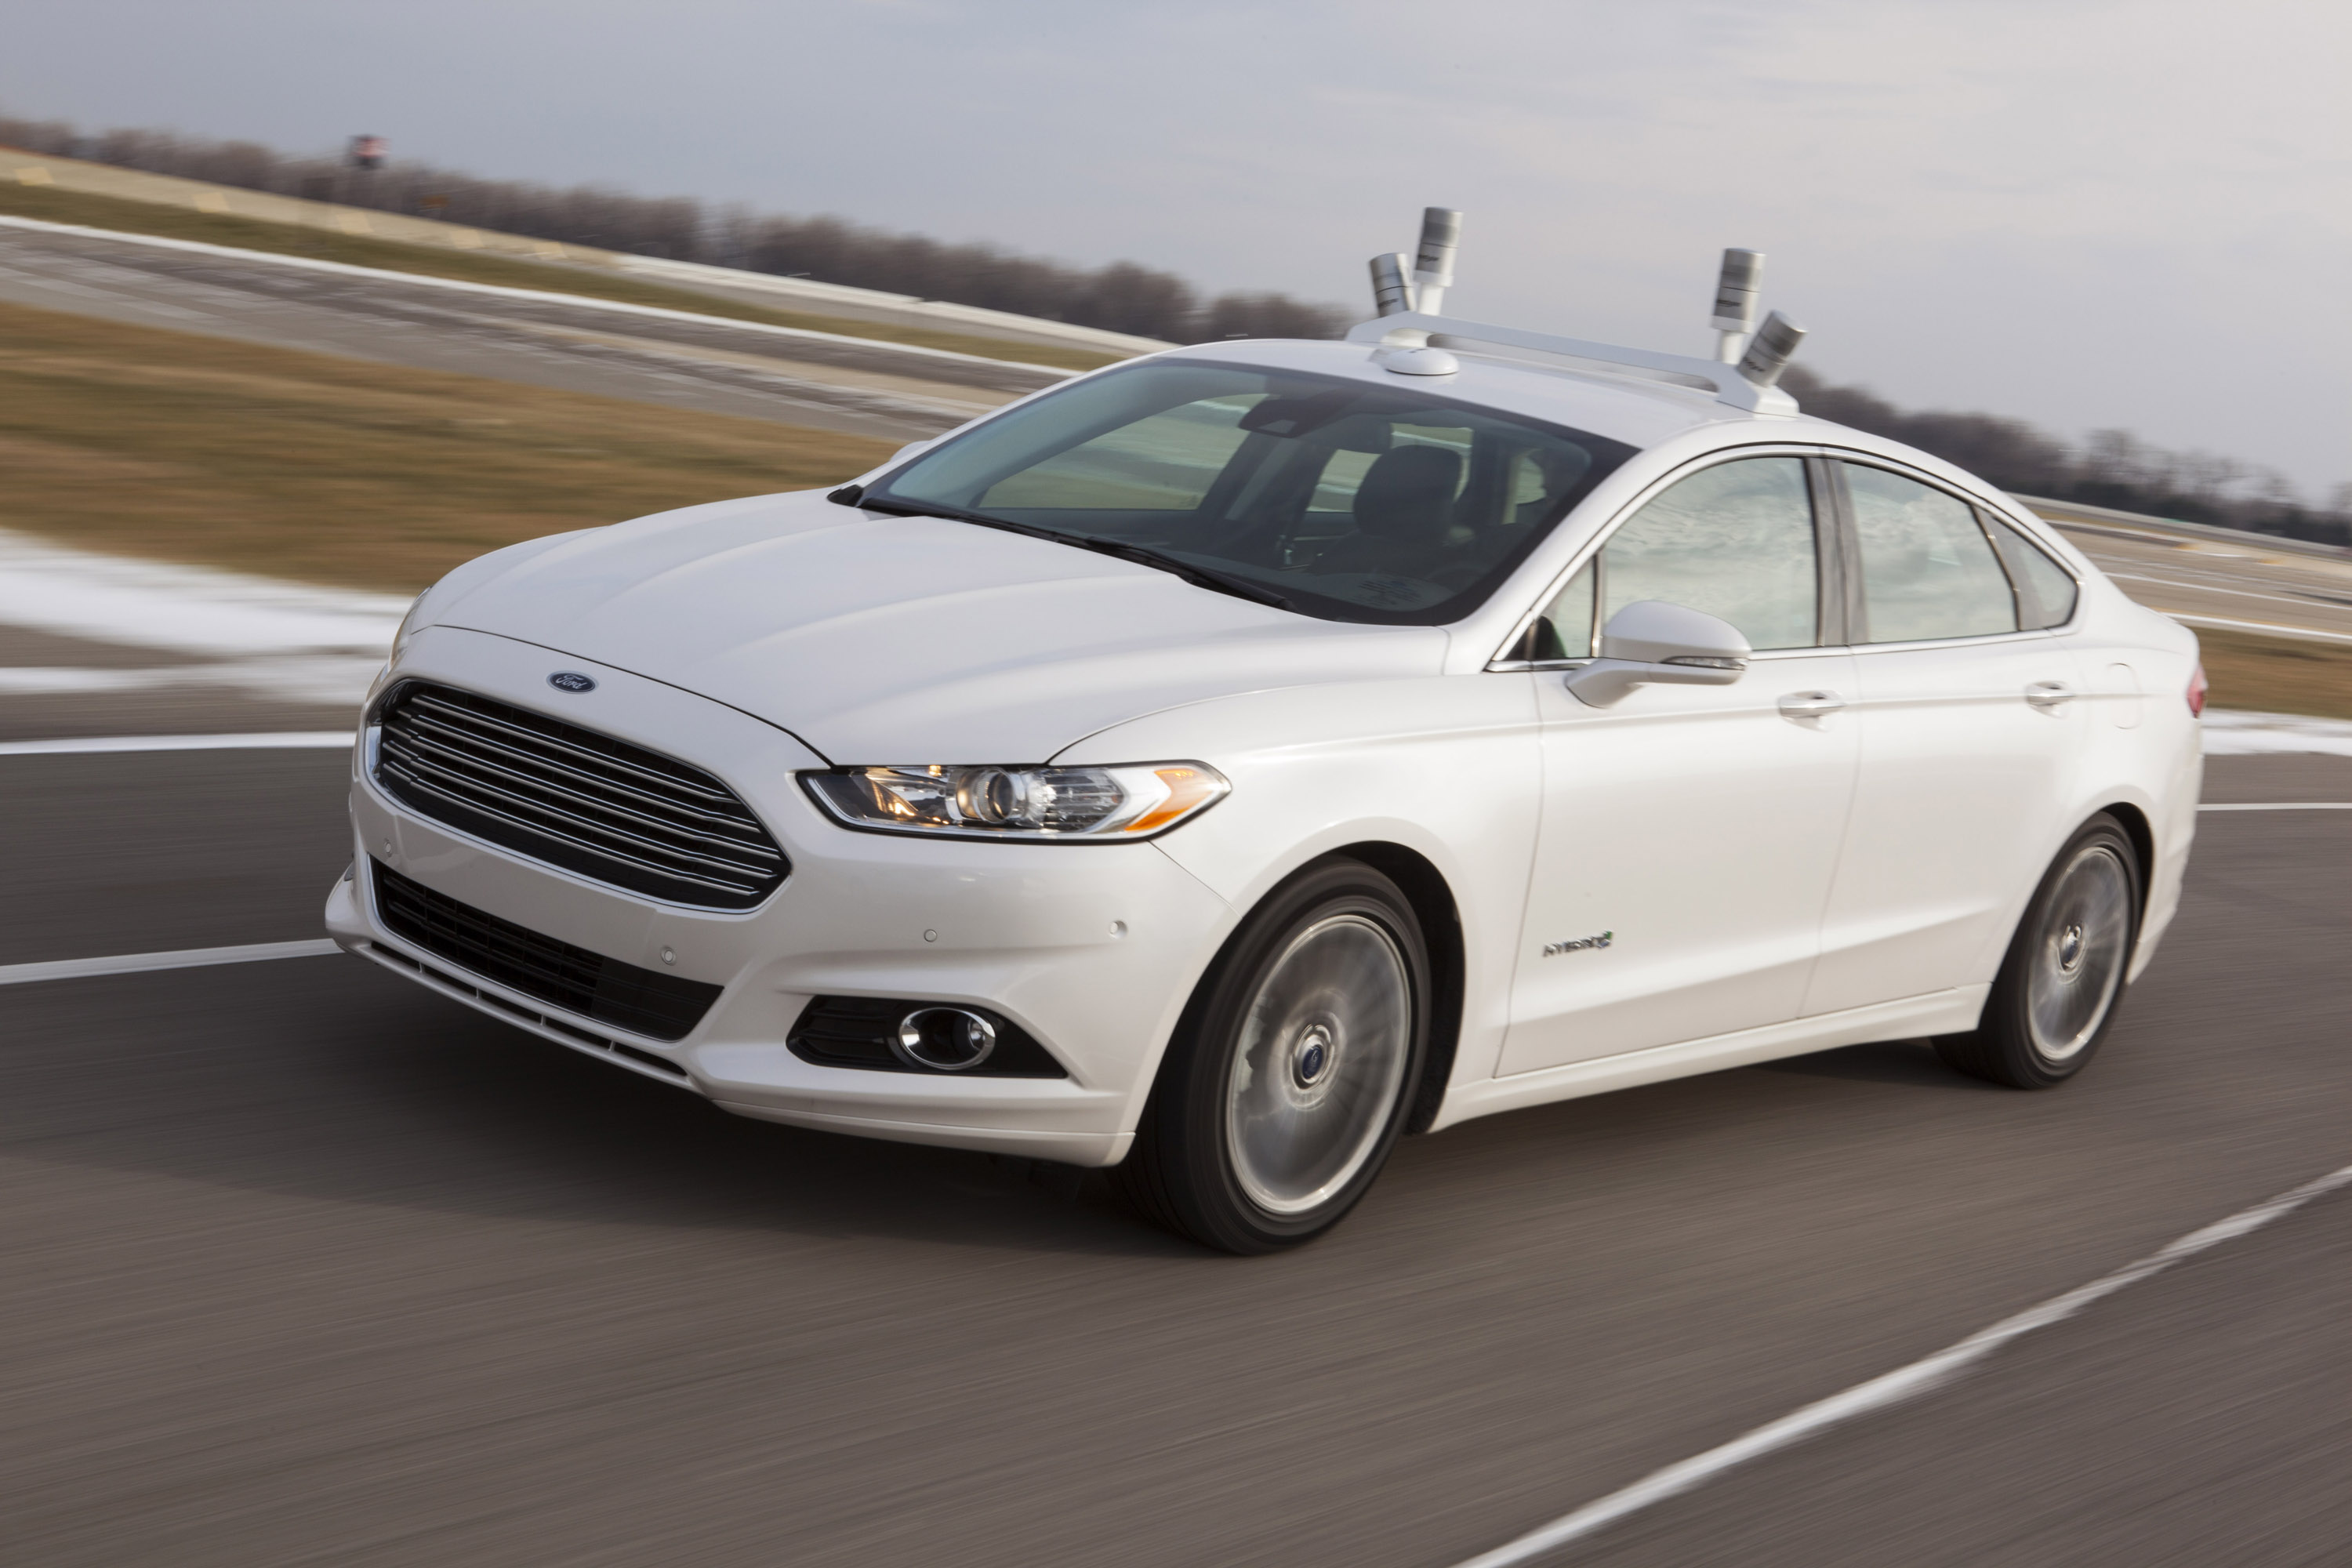 Ford Fusion Hybrid Automated Vehicle